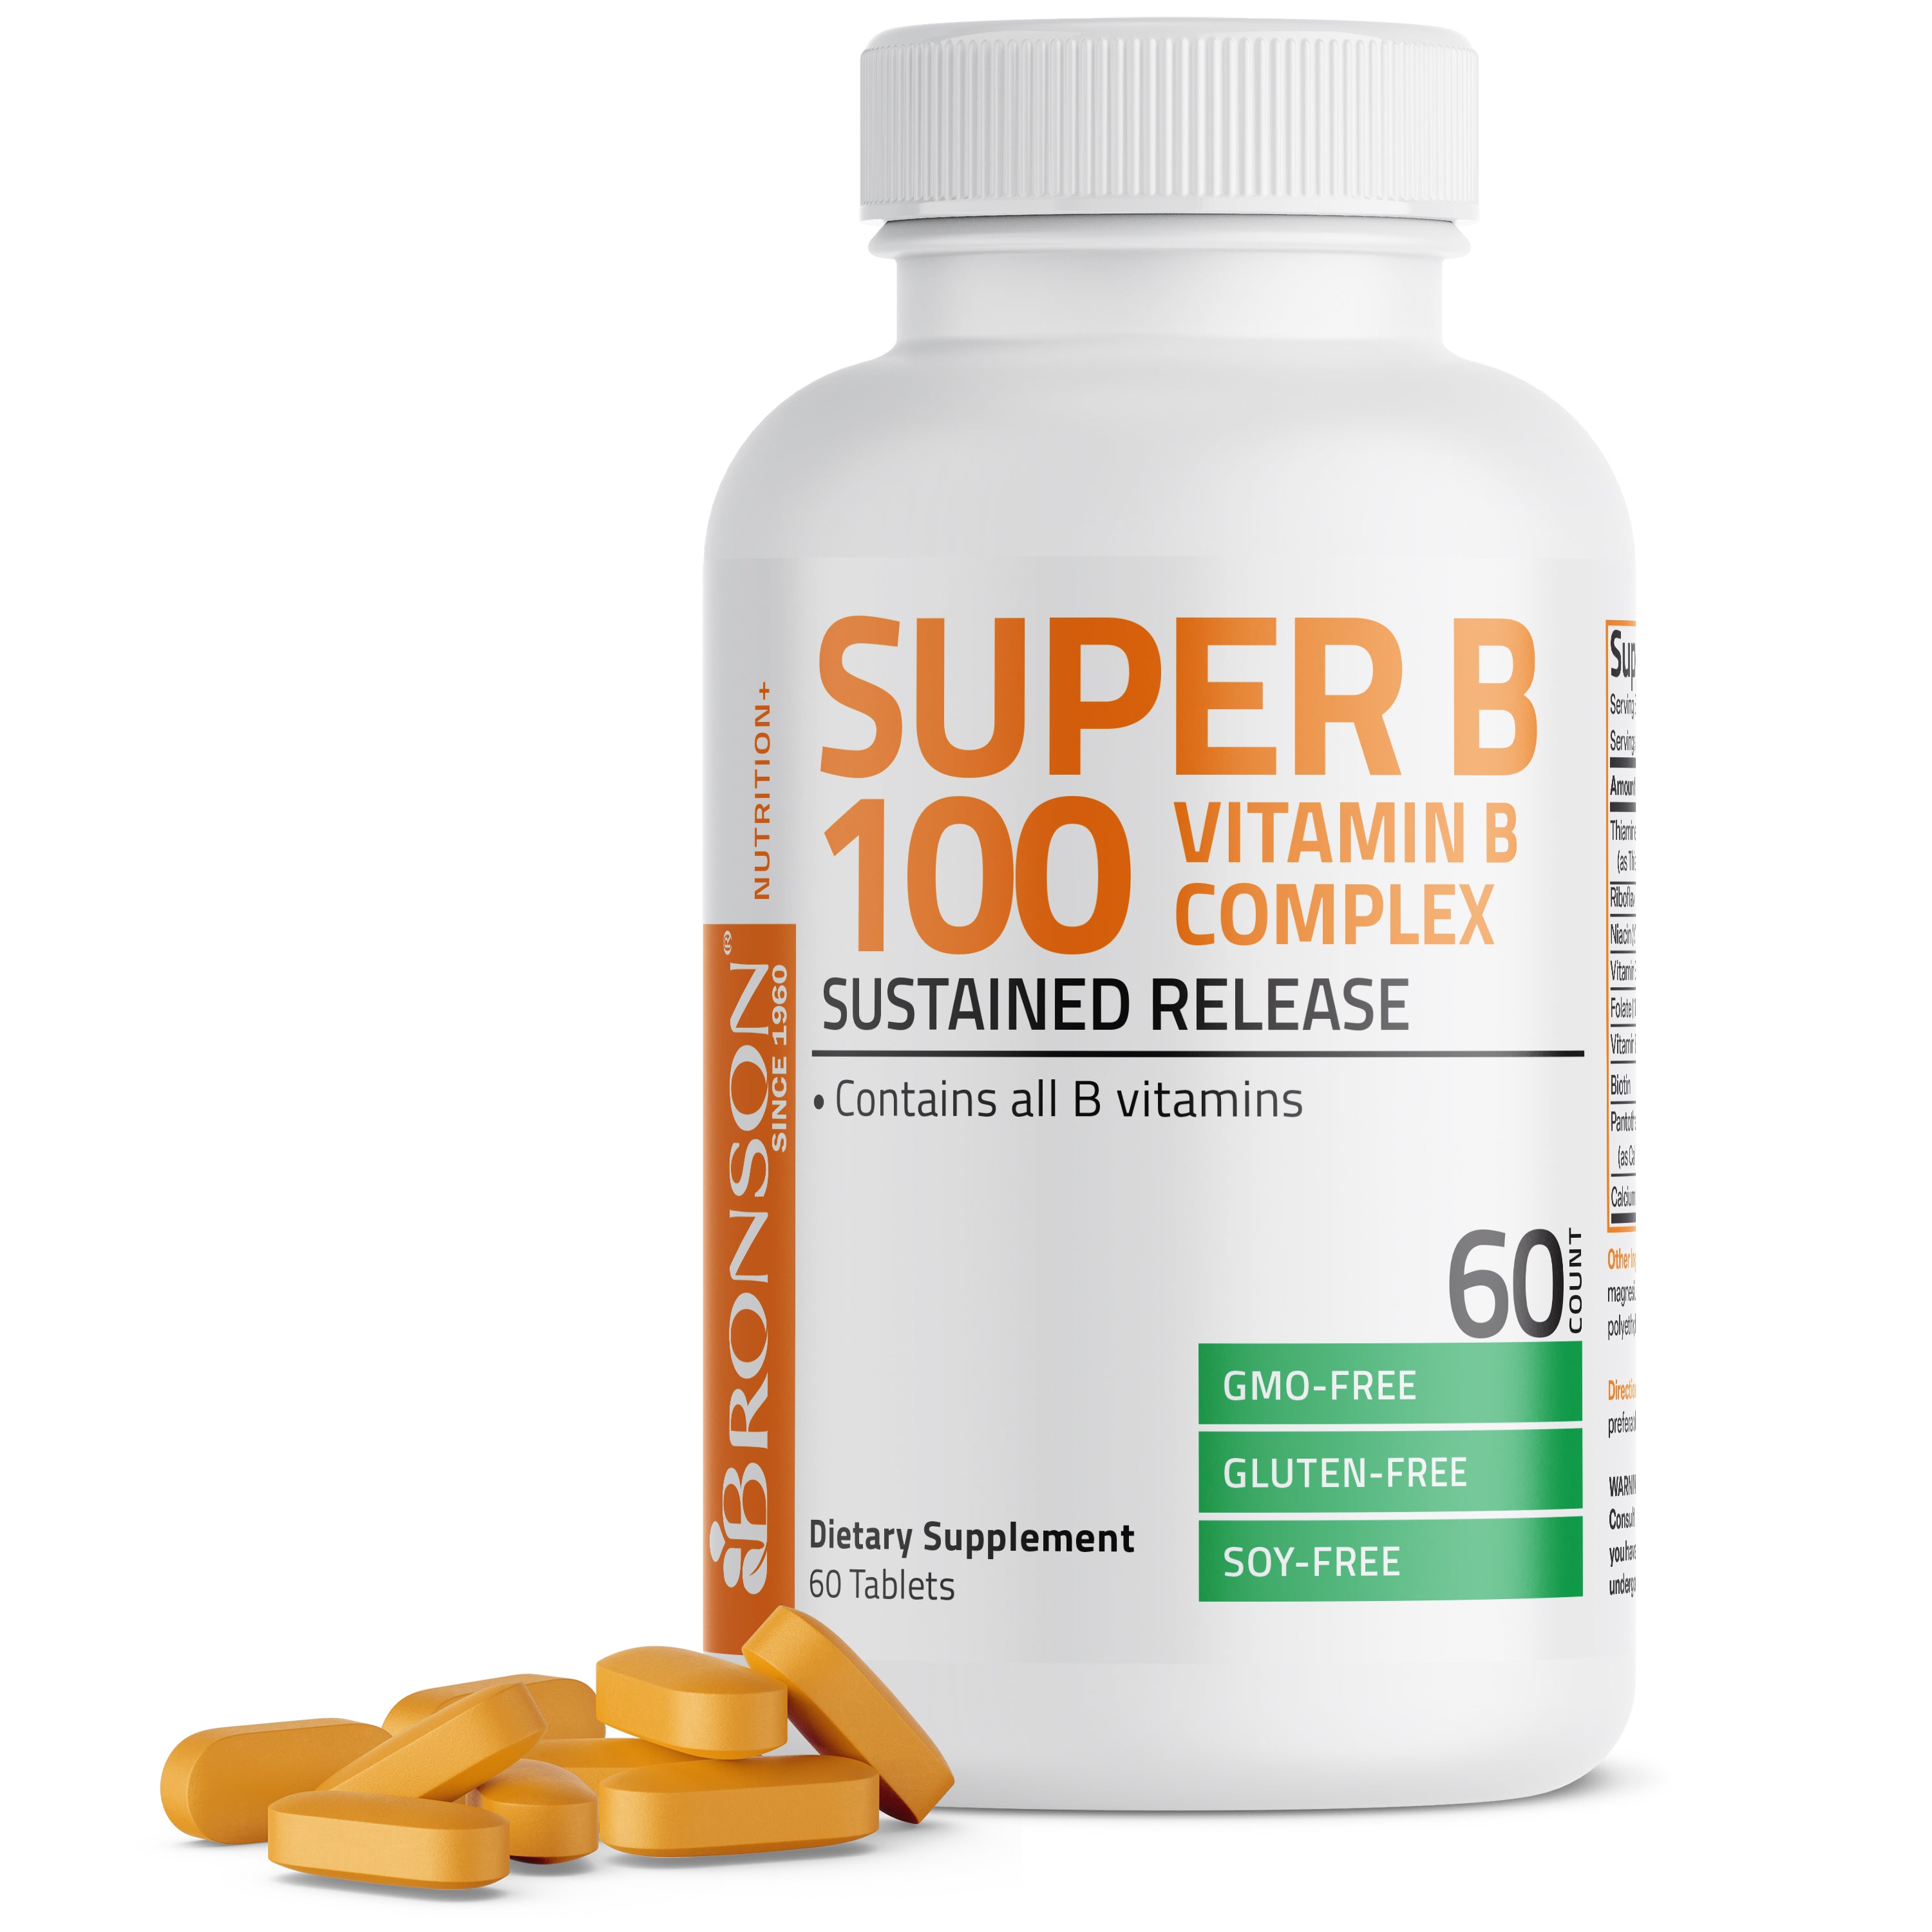 Super Vitamin B 100 Complex Sustained Release view 15 of 6